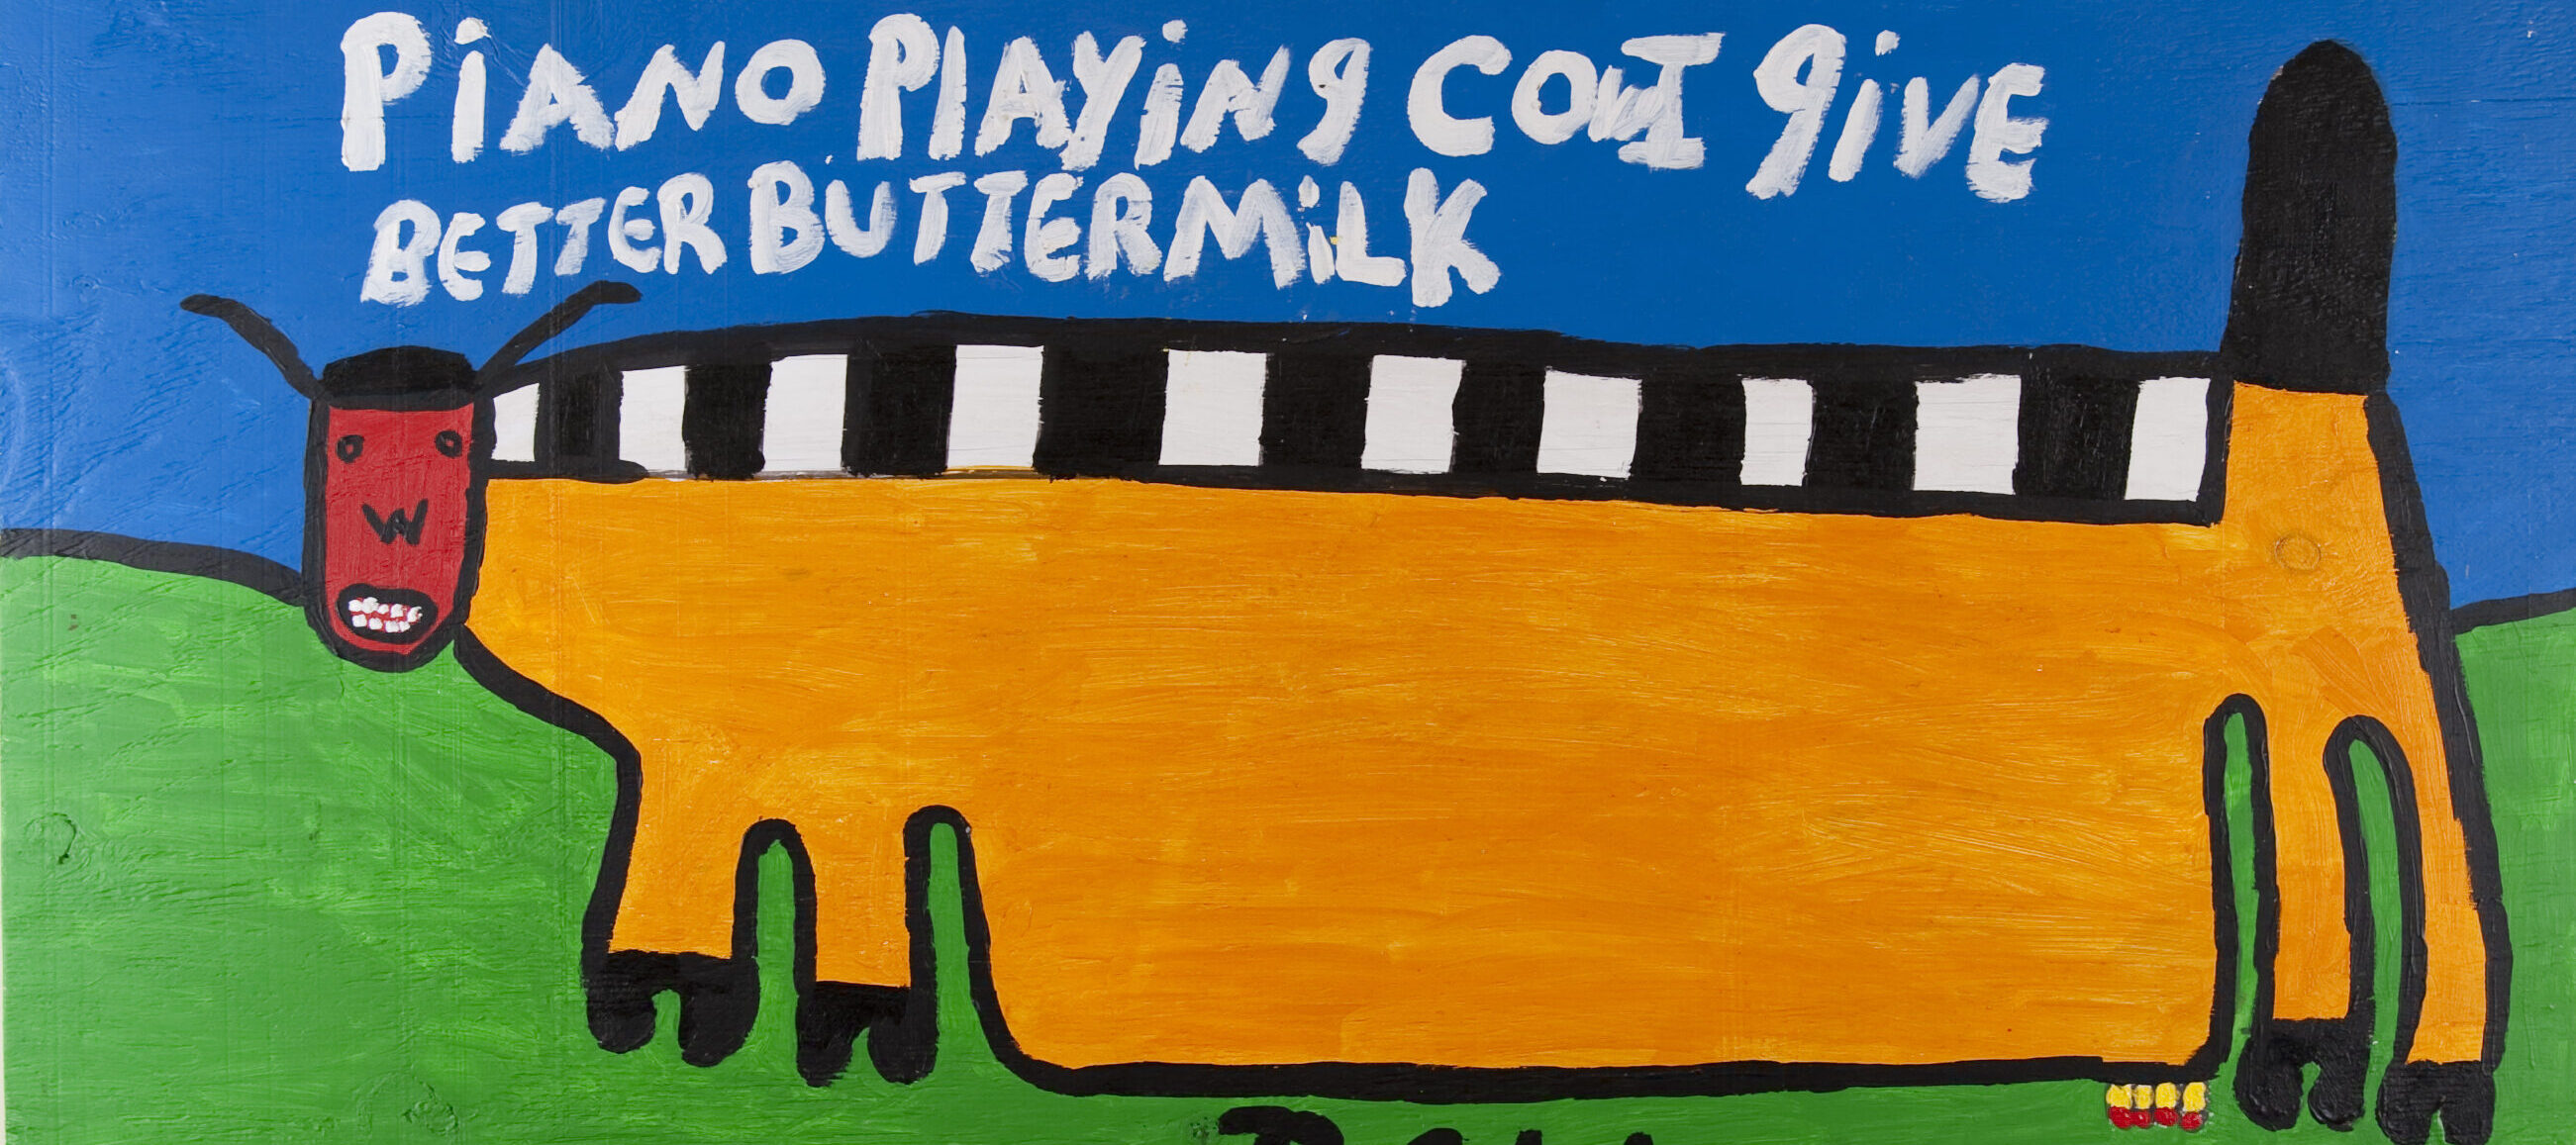 A four-legged, cow-like, rectangular creature stands on a green field, above the initials R.C.W. It has a black and white striped back, golden body, black tail, red humanoid face, black hooves, and udder. It is under a blue sky and the white words ‘piano playing cow I give better buttermilk.'